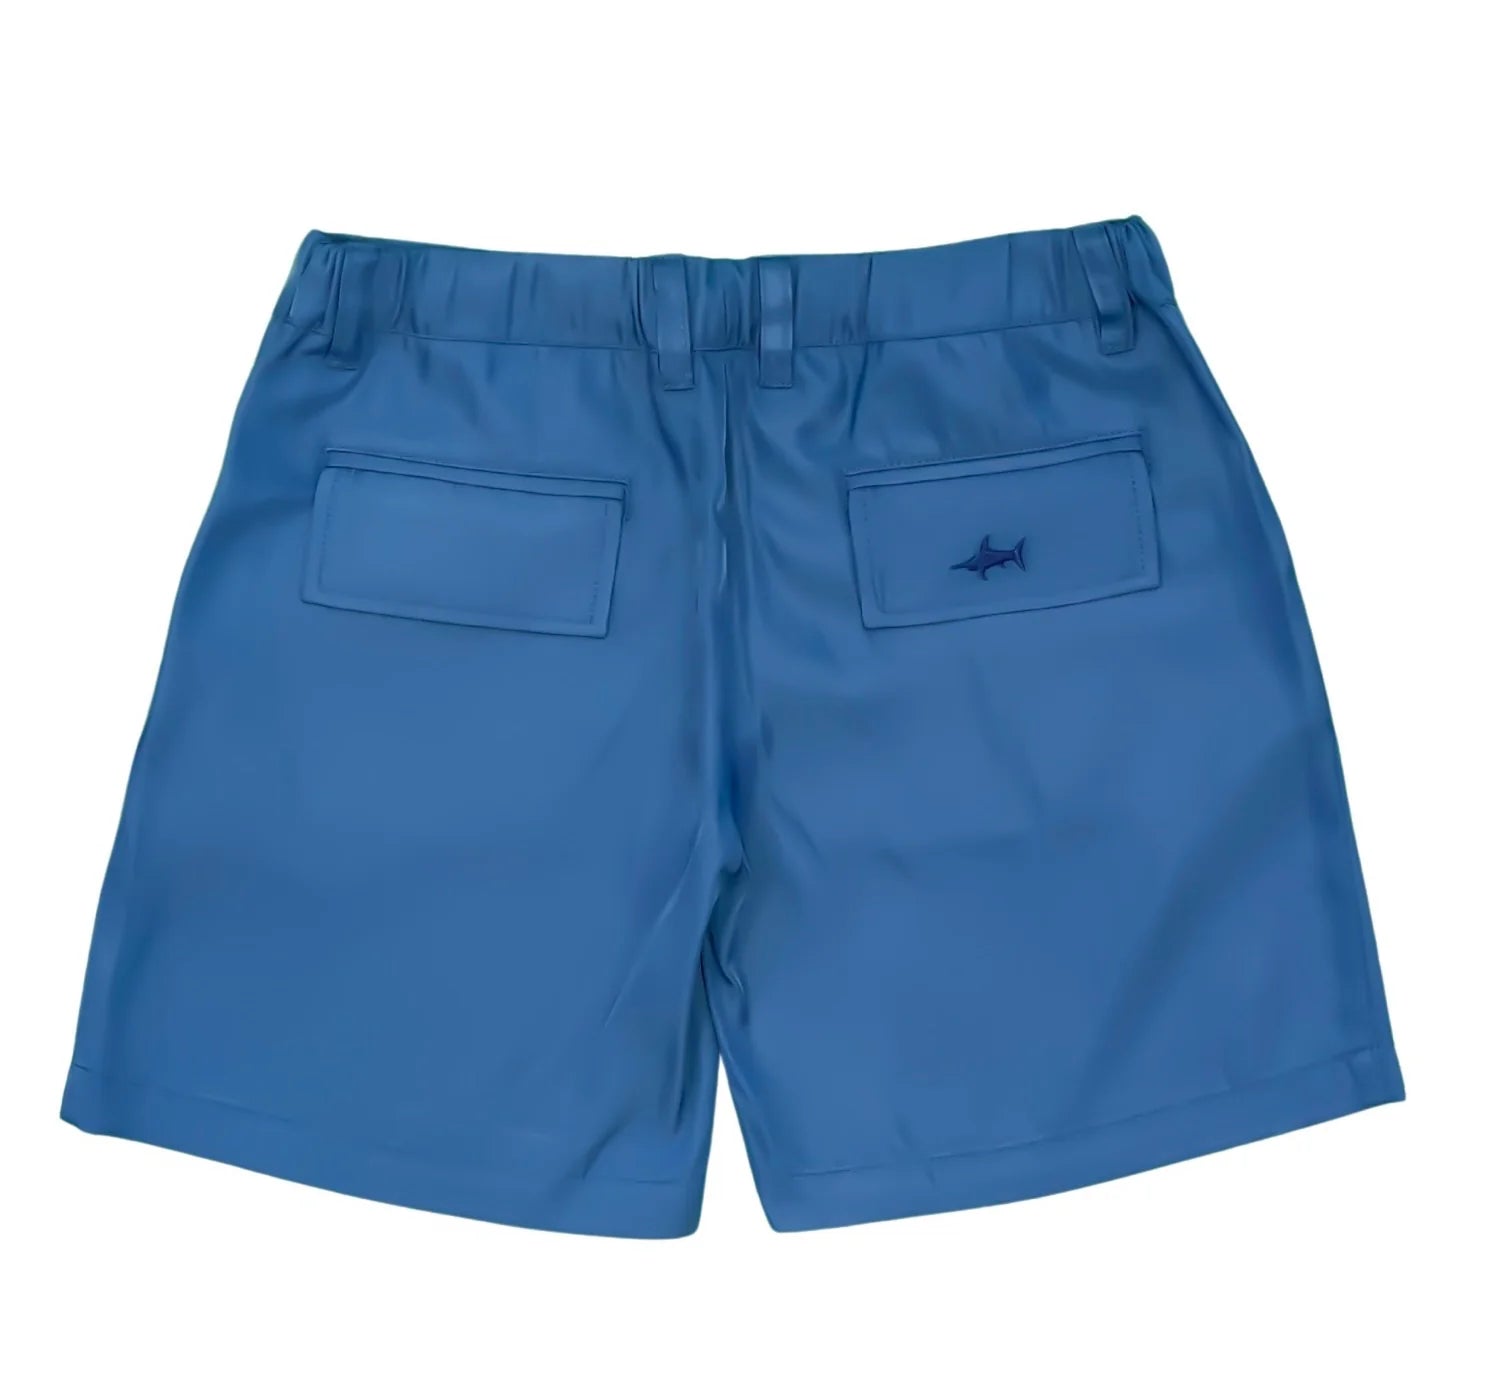 Teal Ponce Performance Shorts